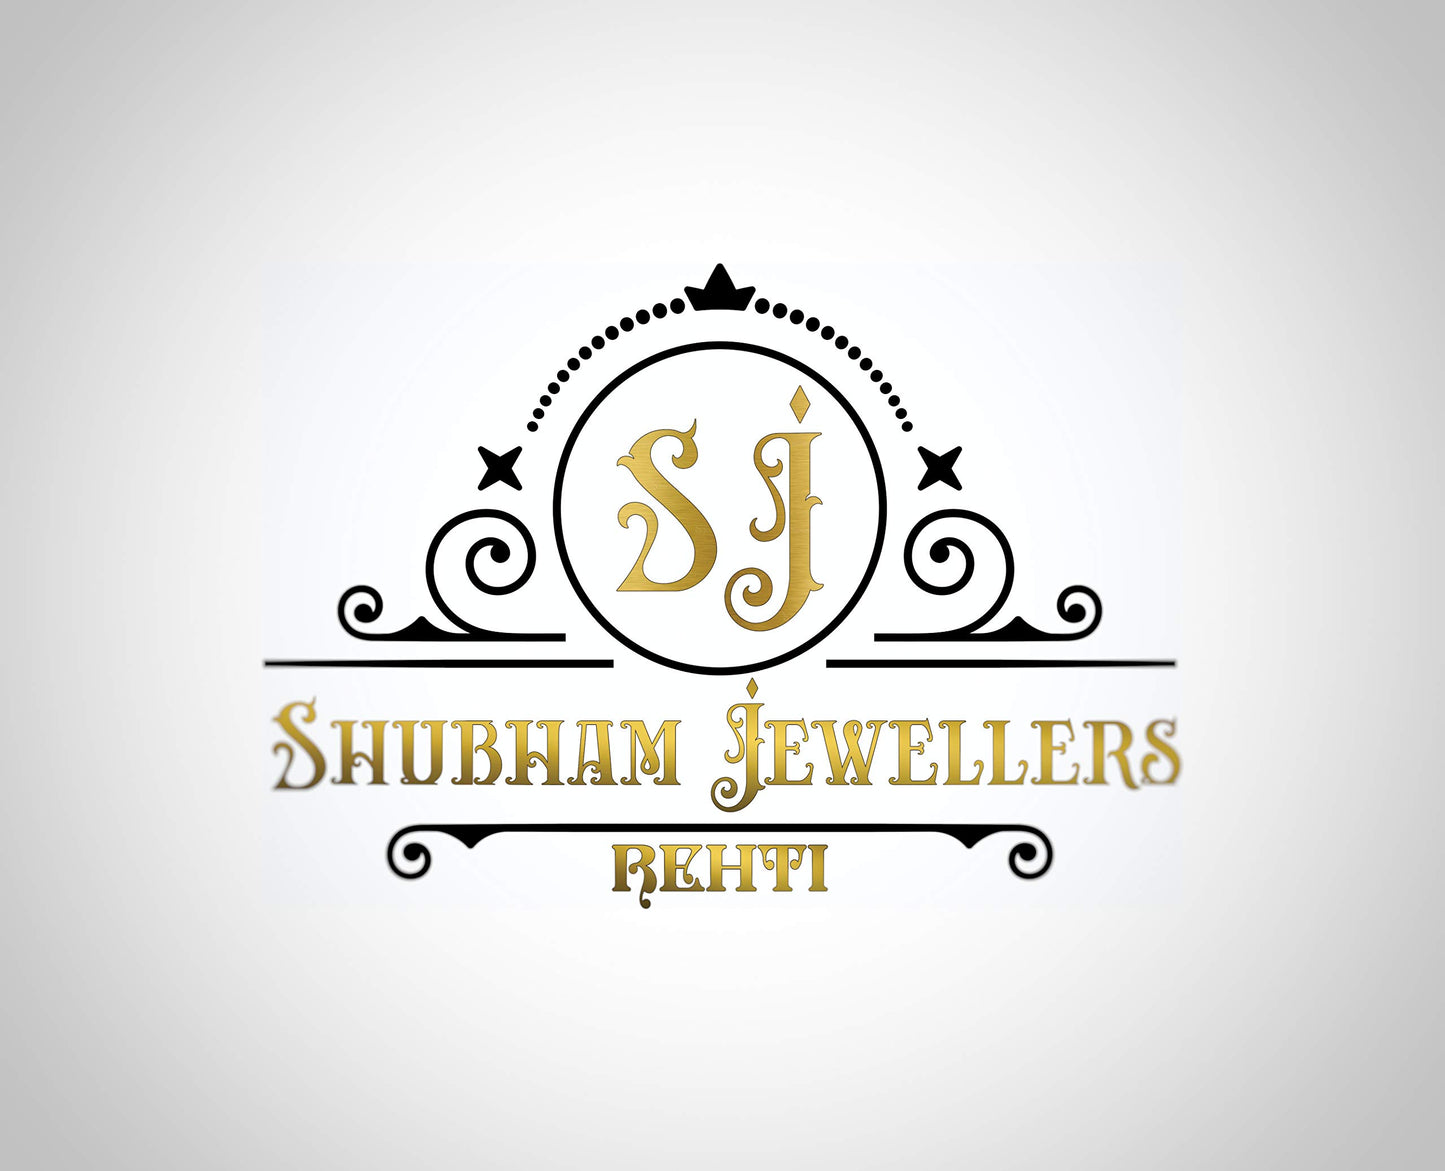 Shubham Jewellers Rehti 925-92.5 Pure Sterling Silver OM Oxidised Pendant For Men,Women,Children,Boys and Girls